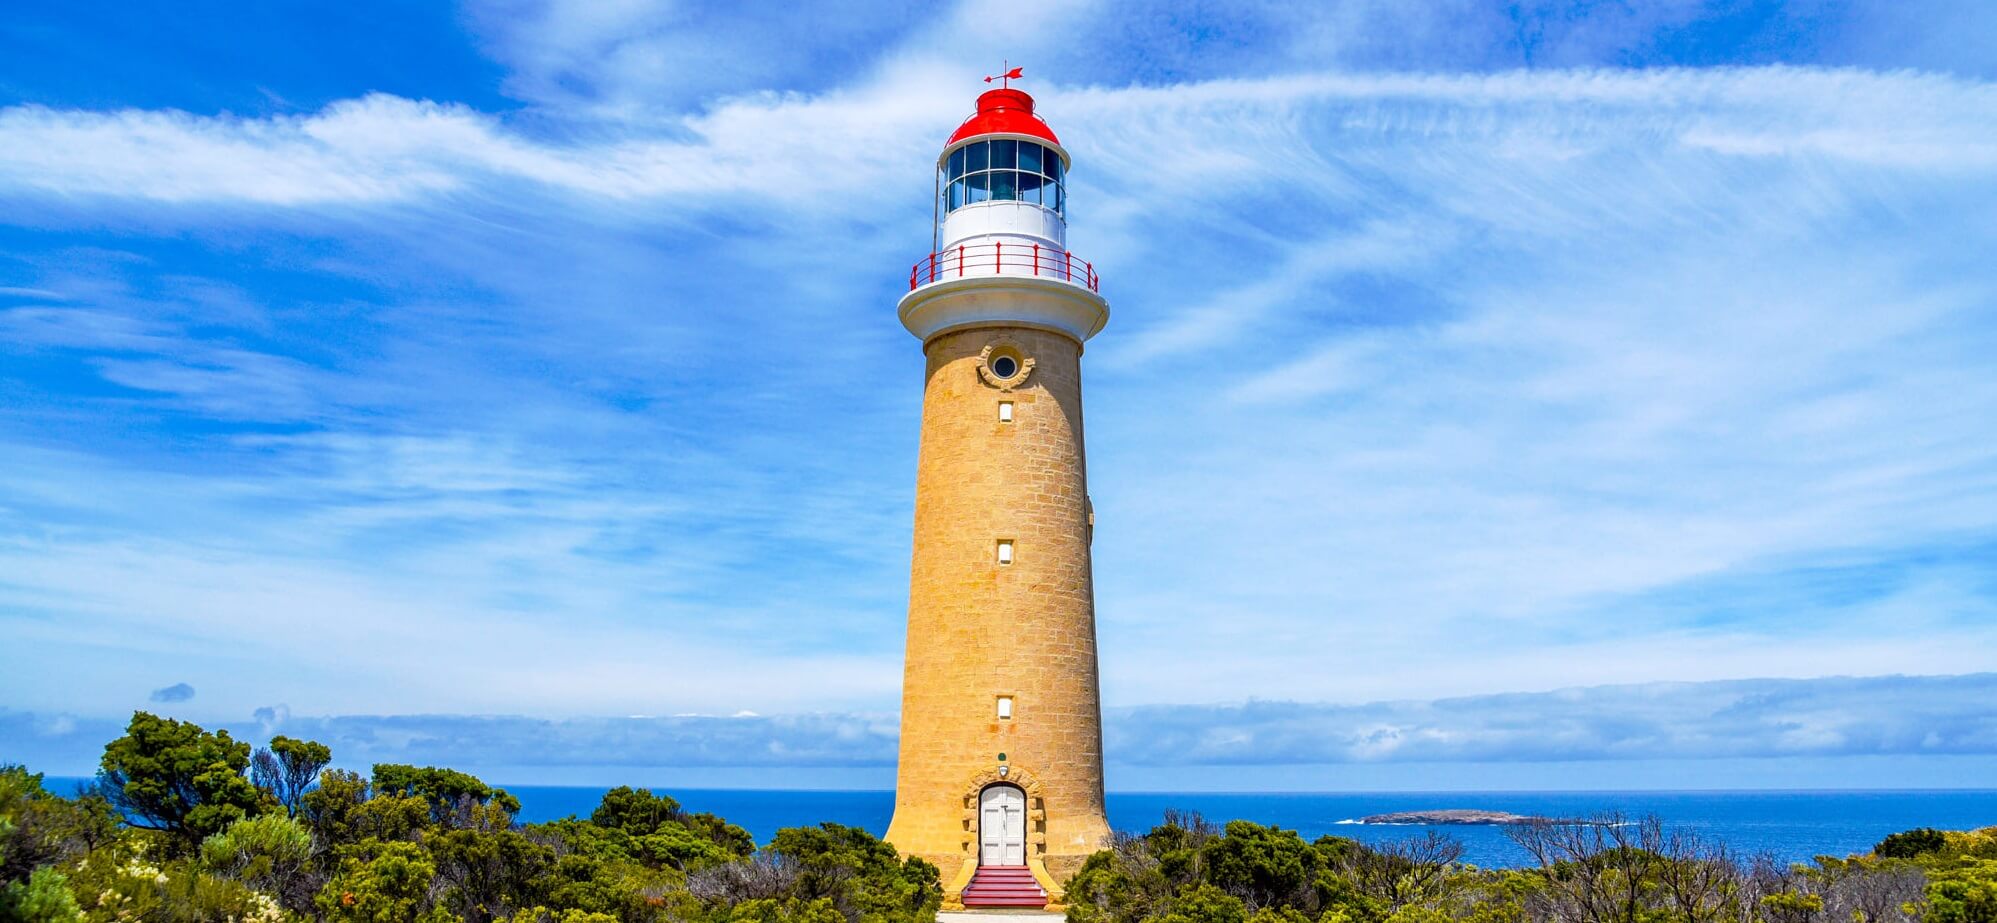 The History of the Cape Du Couedic Lighthouse